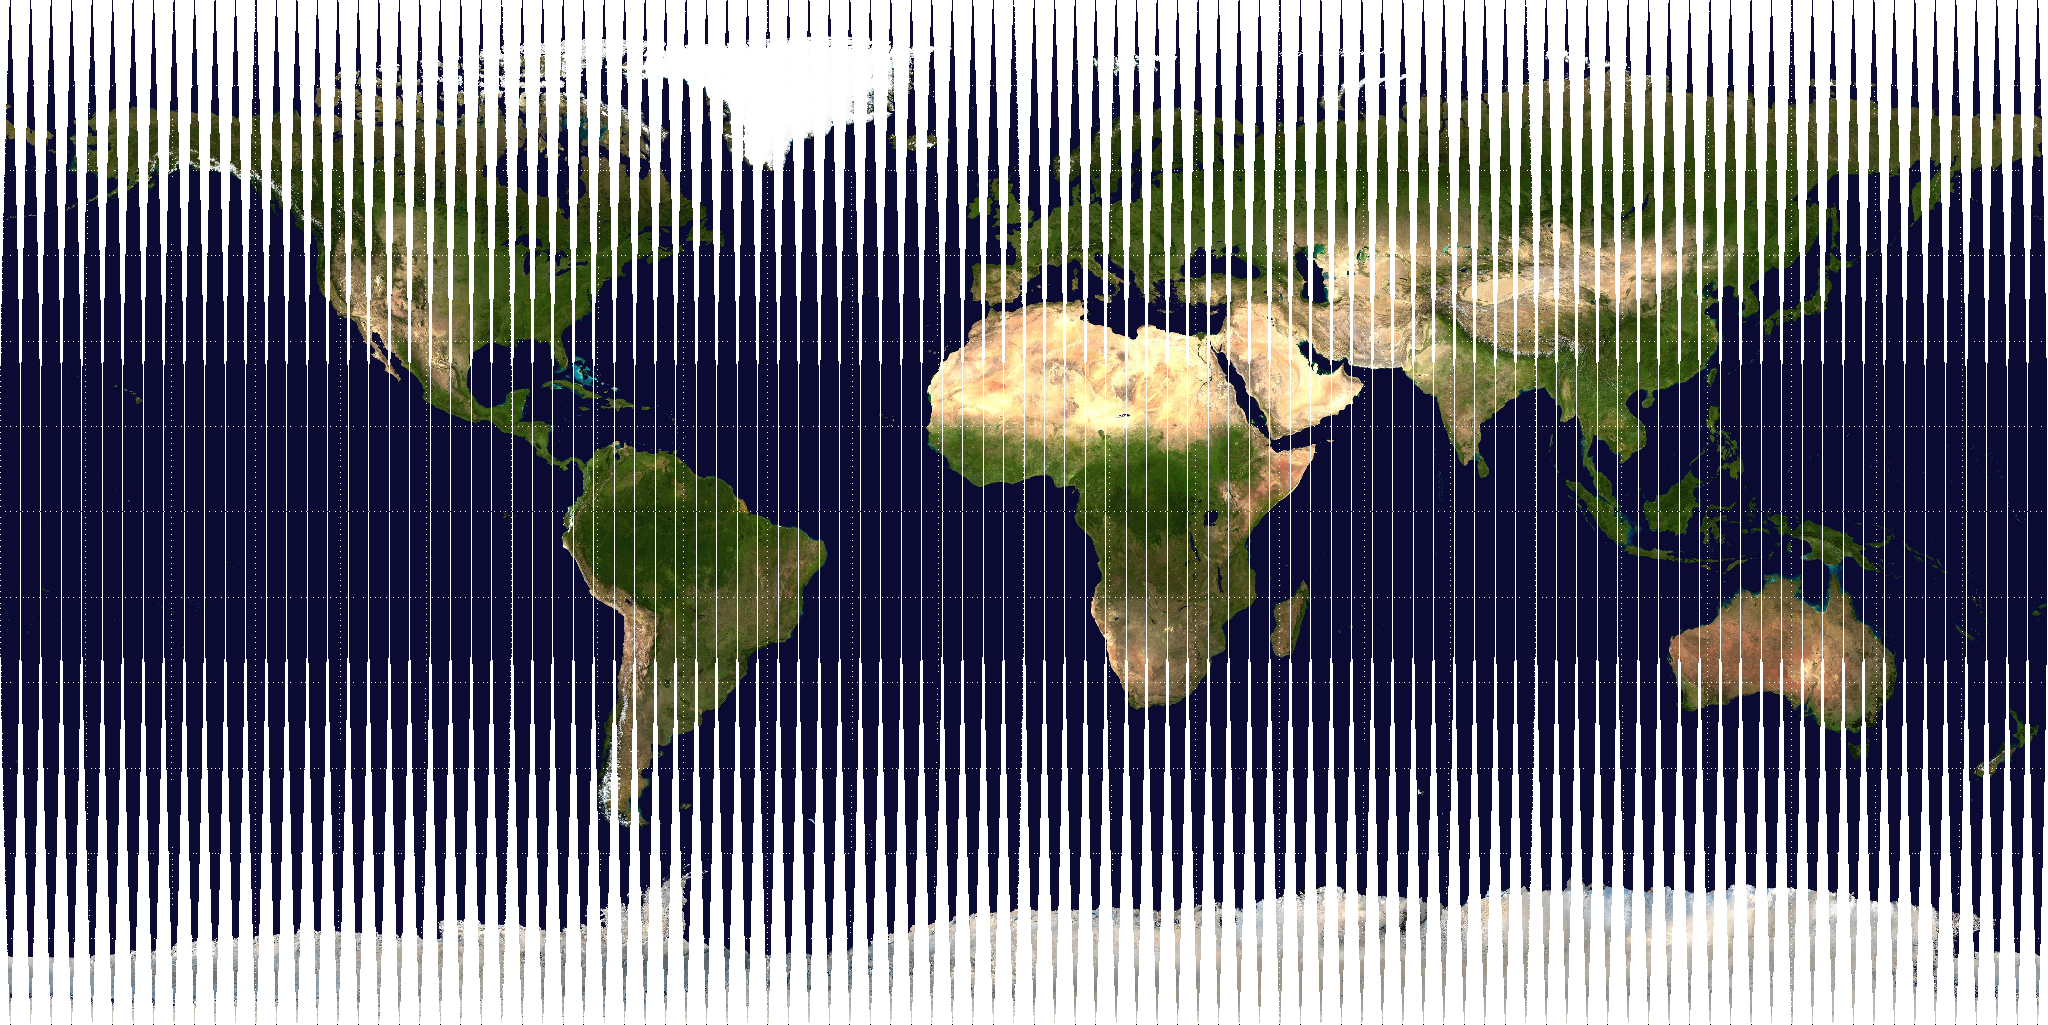 A sinusoidal projection with 100 slices